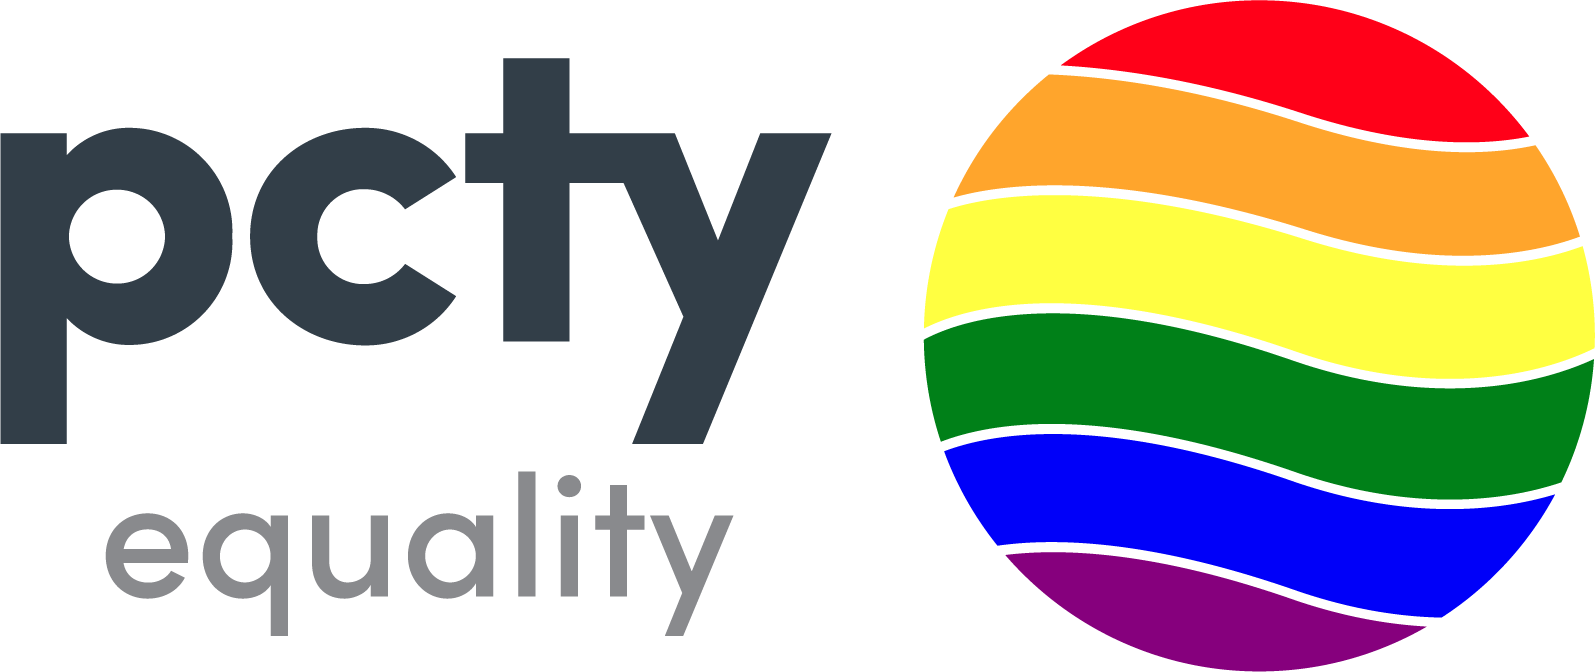 PCTY Equality